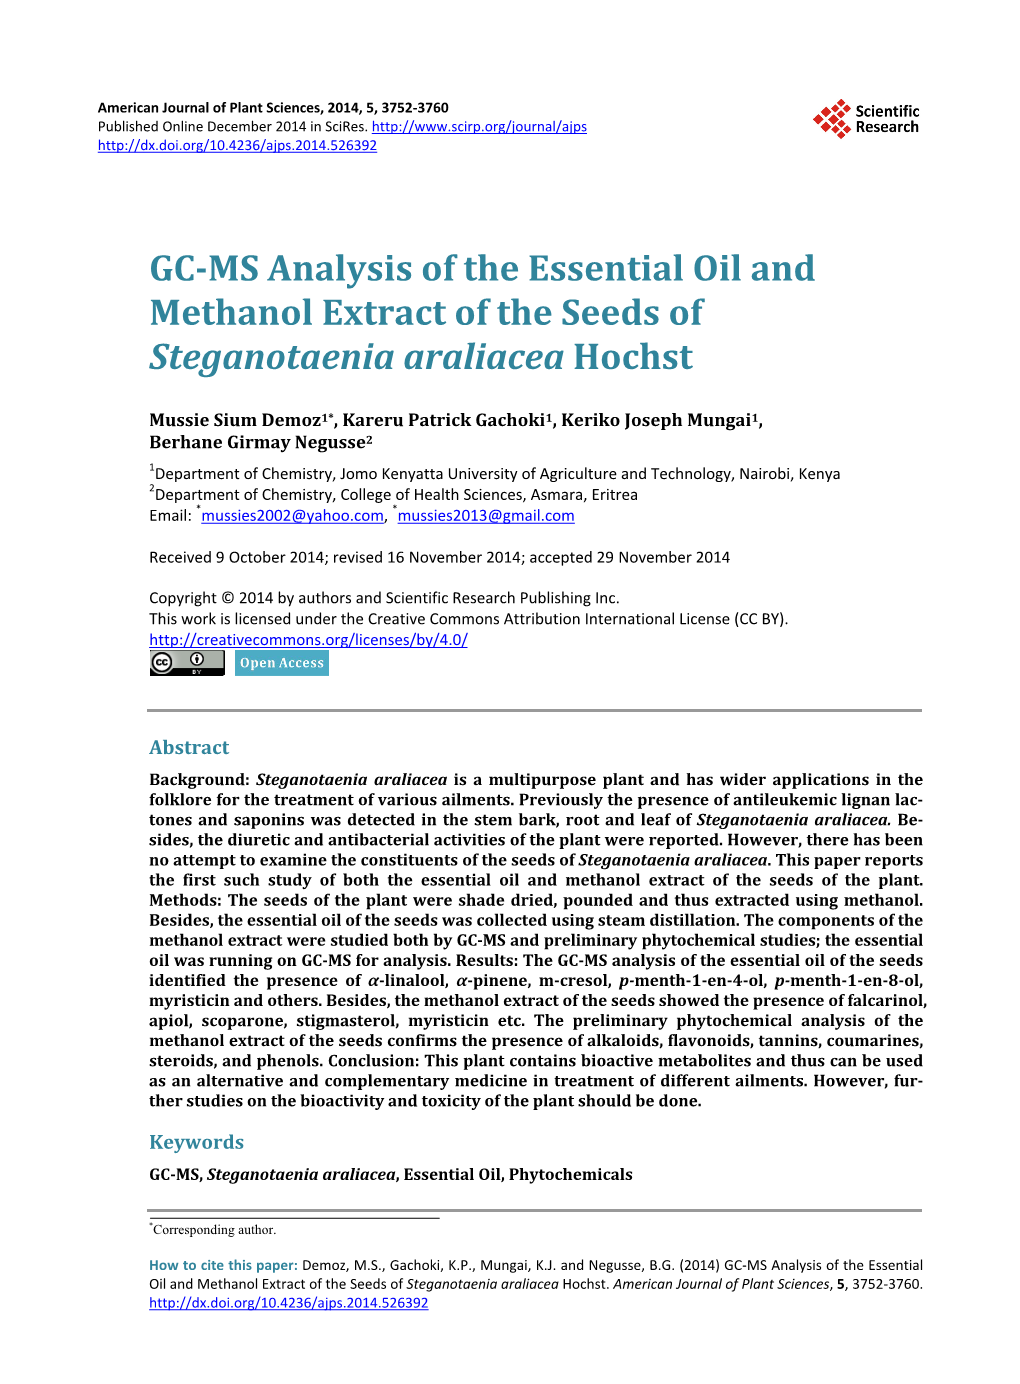 GC-MS Analysis of the Essential Oil and Methanol Extract of the Seeds of Steganotaenia Araliacea Hochst